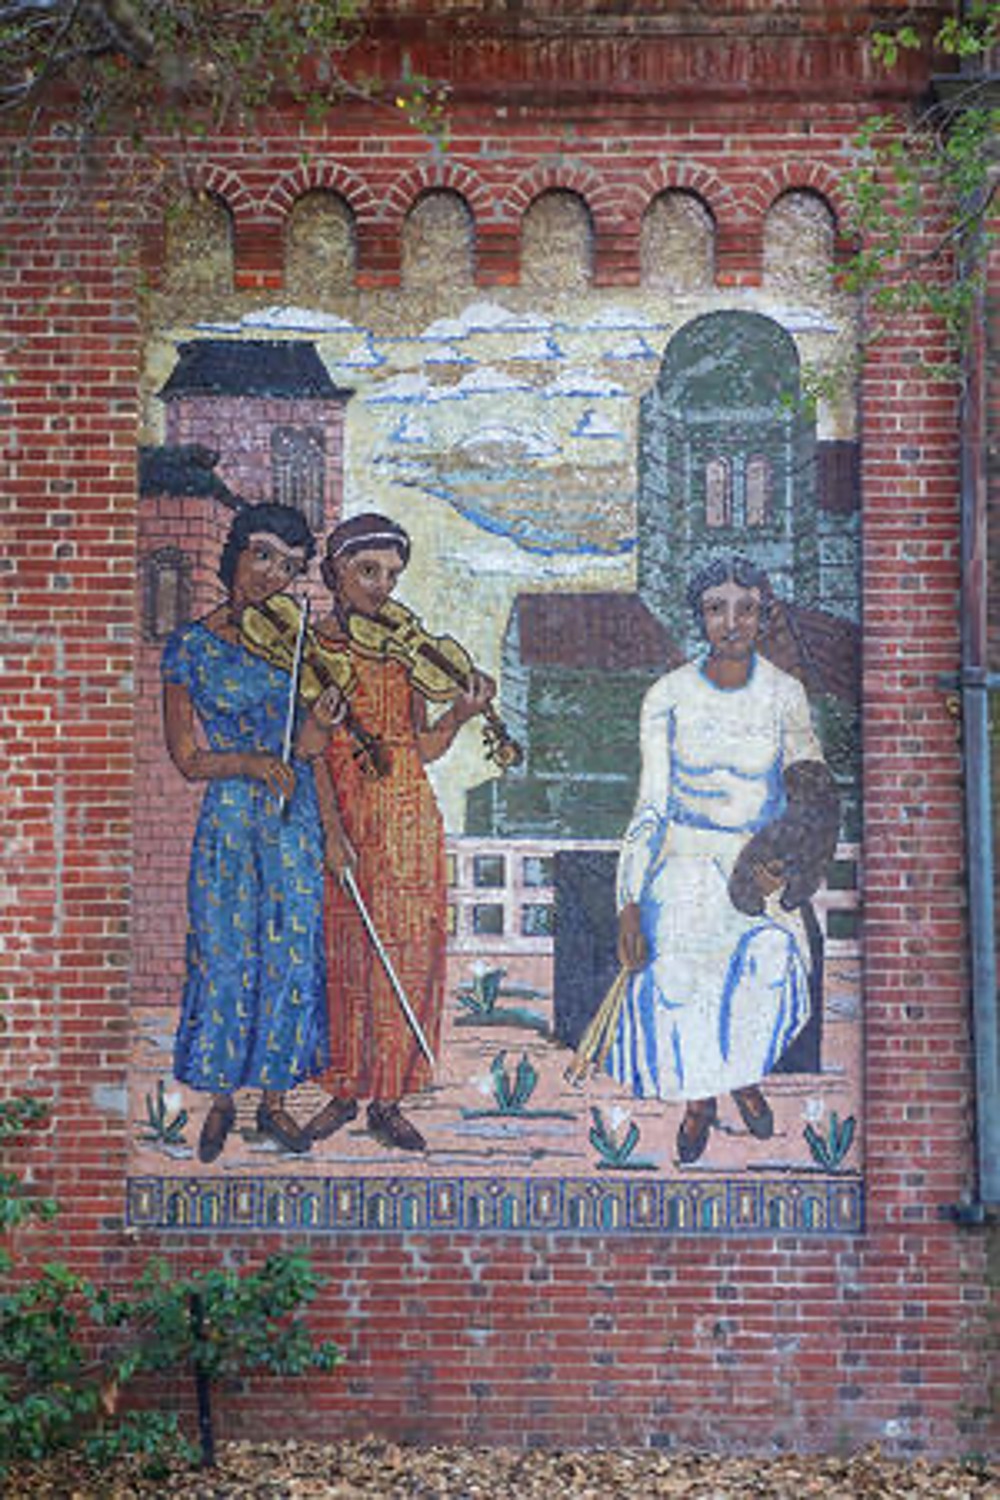 Tile mosaic showing a man in a white robe being played music by two women, one in a blue dress and one in an orange dress, on a brick wall.